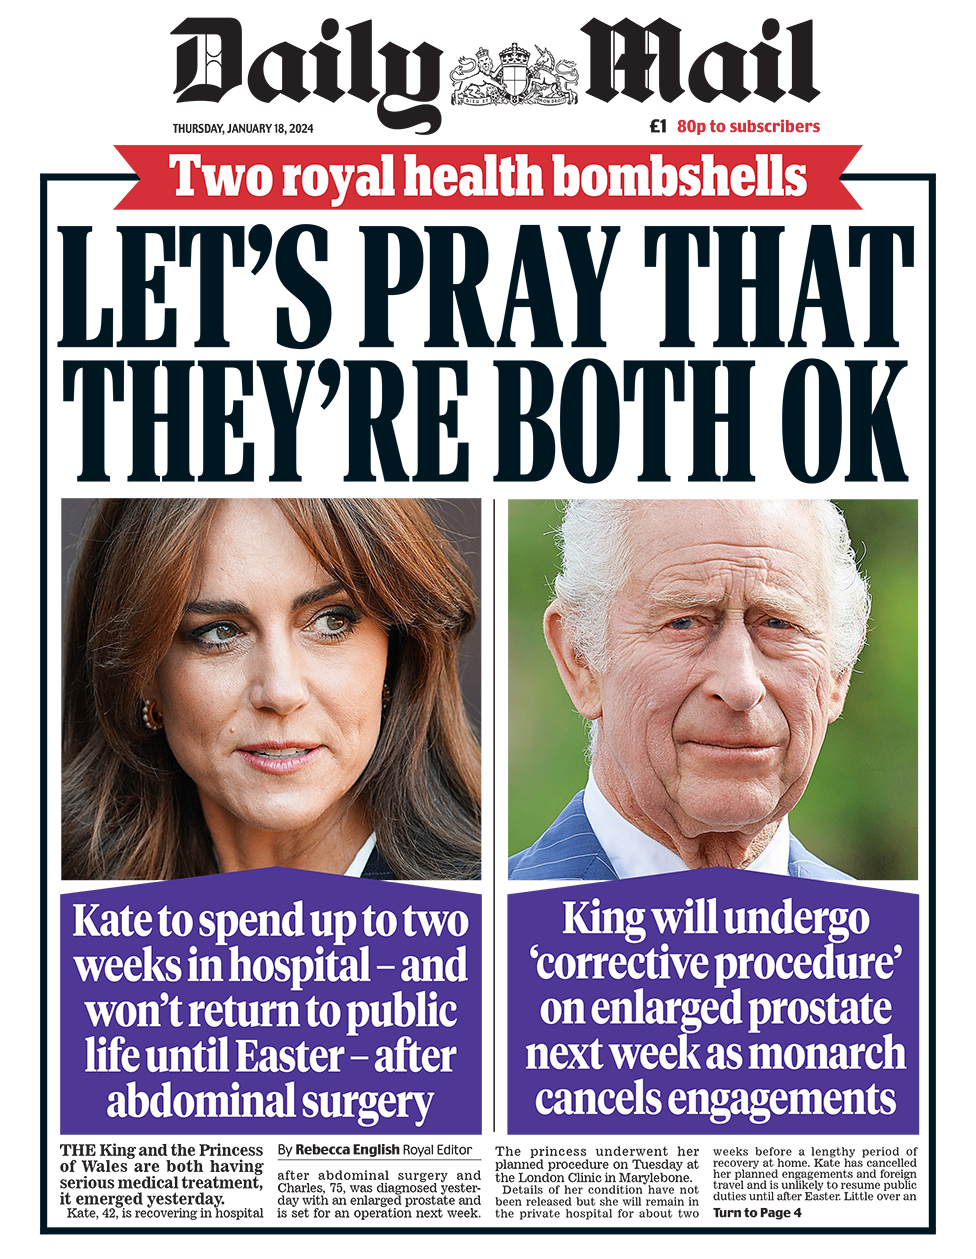 The headline in the Mail reads: "Let's pray that they're both ok".